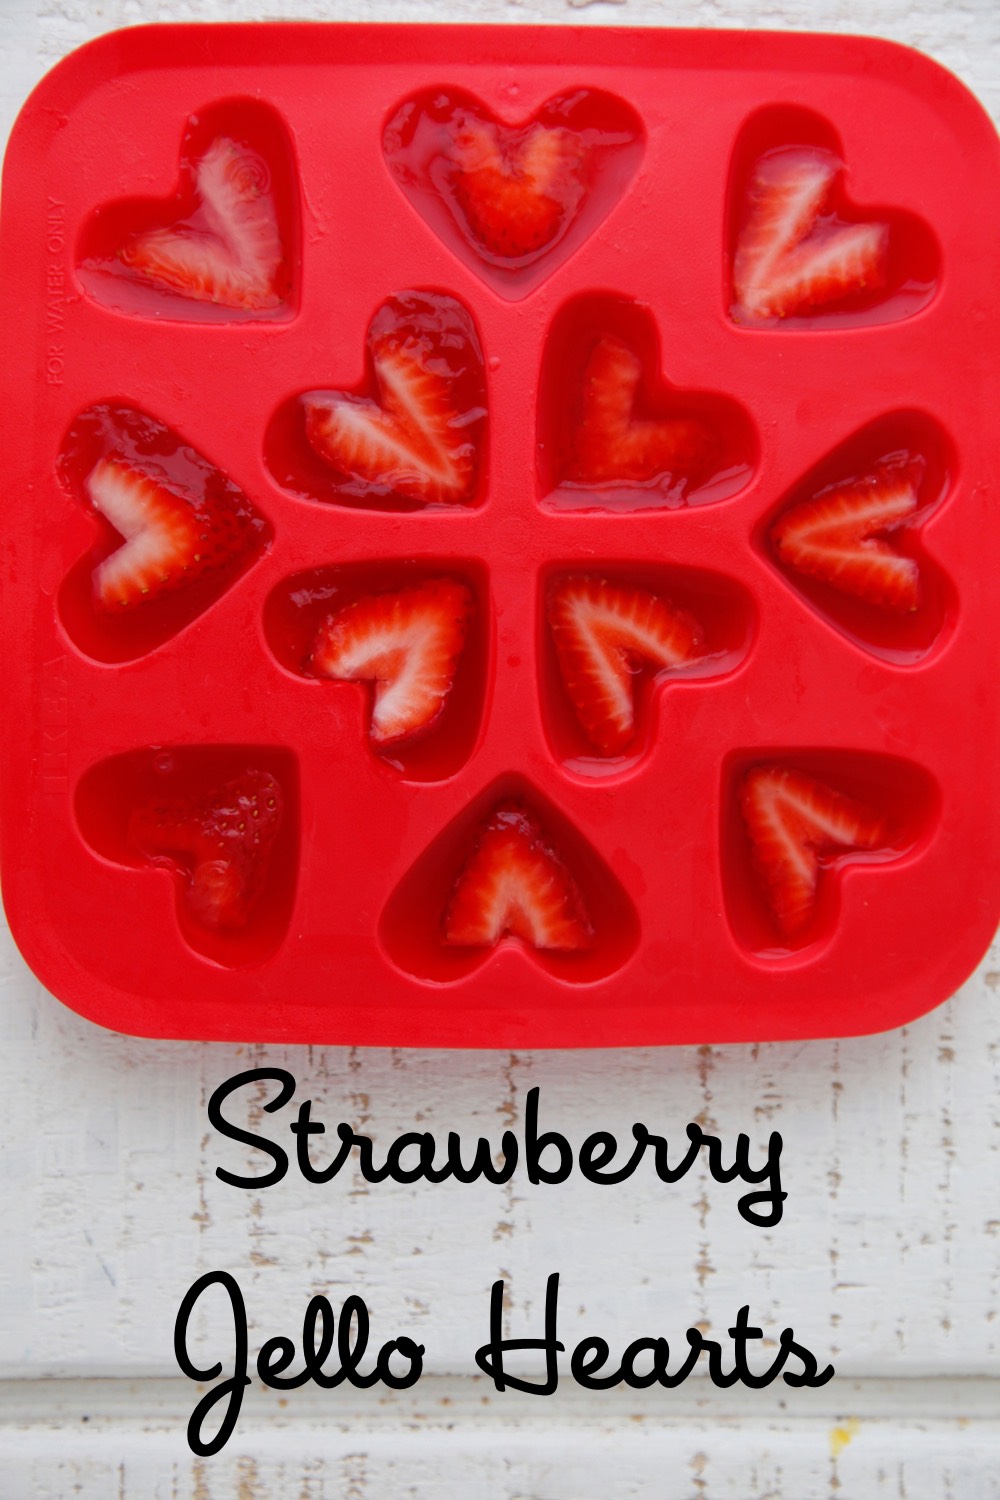 Vegan Strawberry Jello Hearts from Weelicious for @CAStrawberries #StrawberryRed